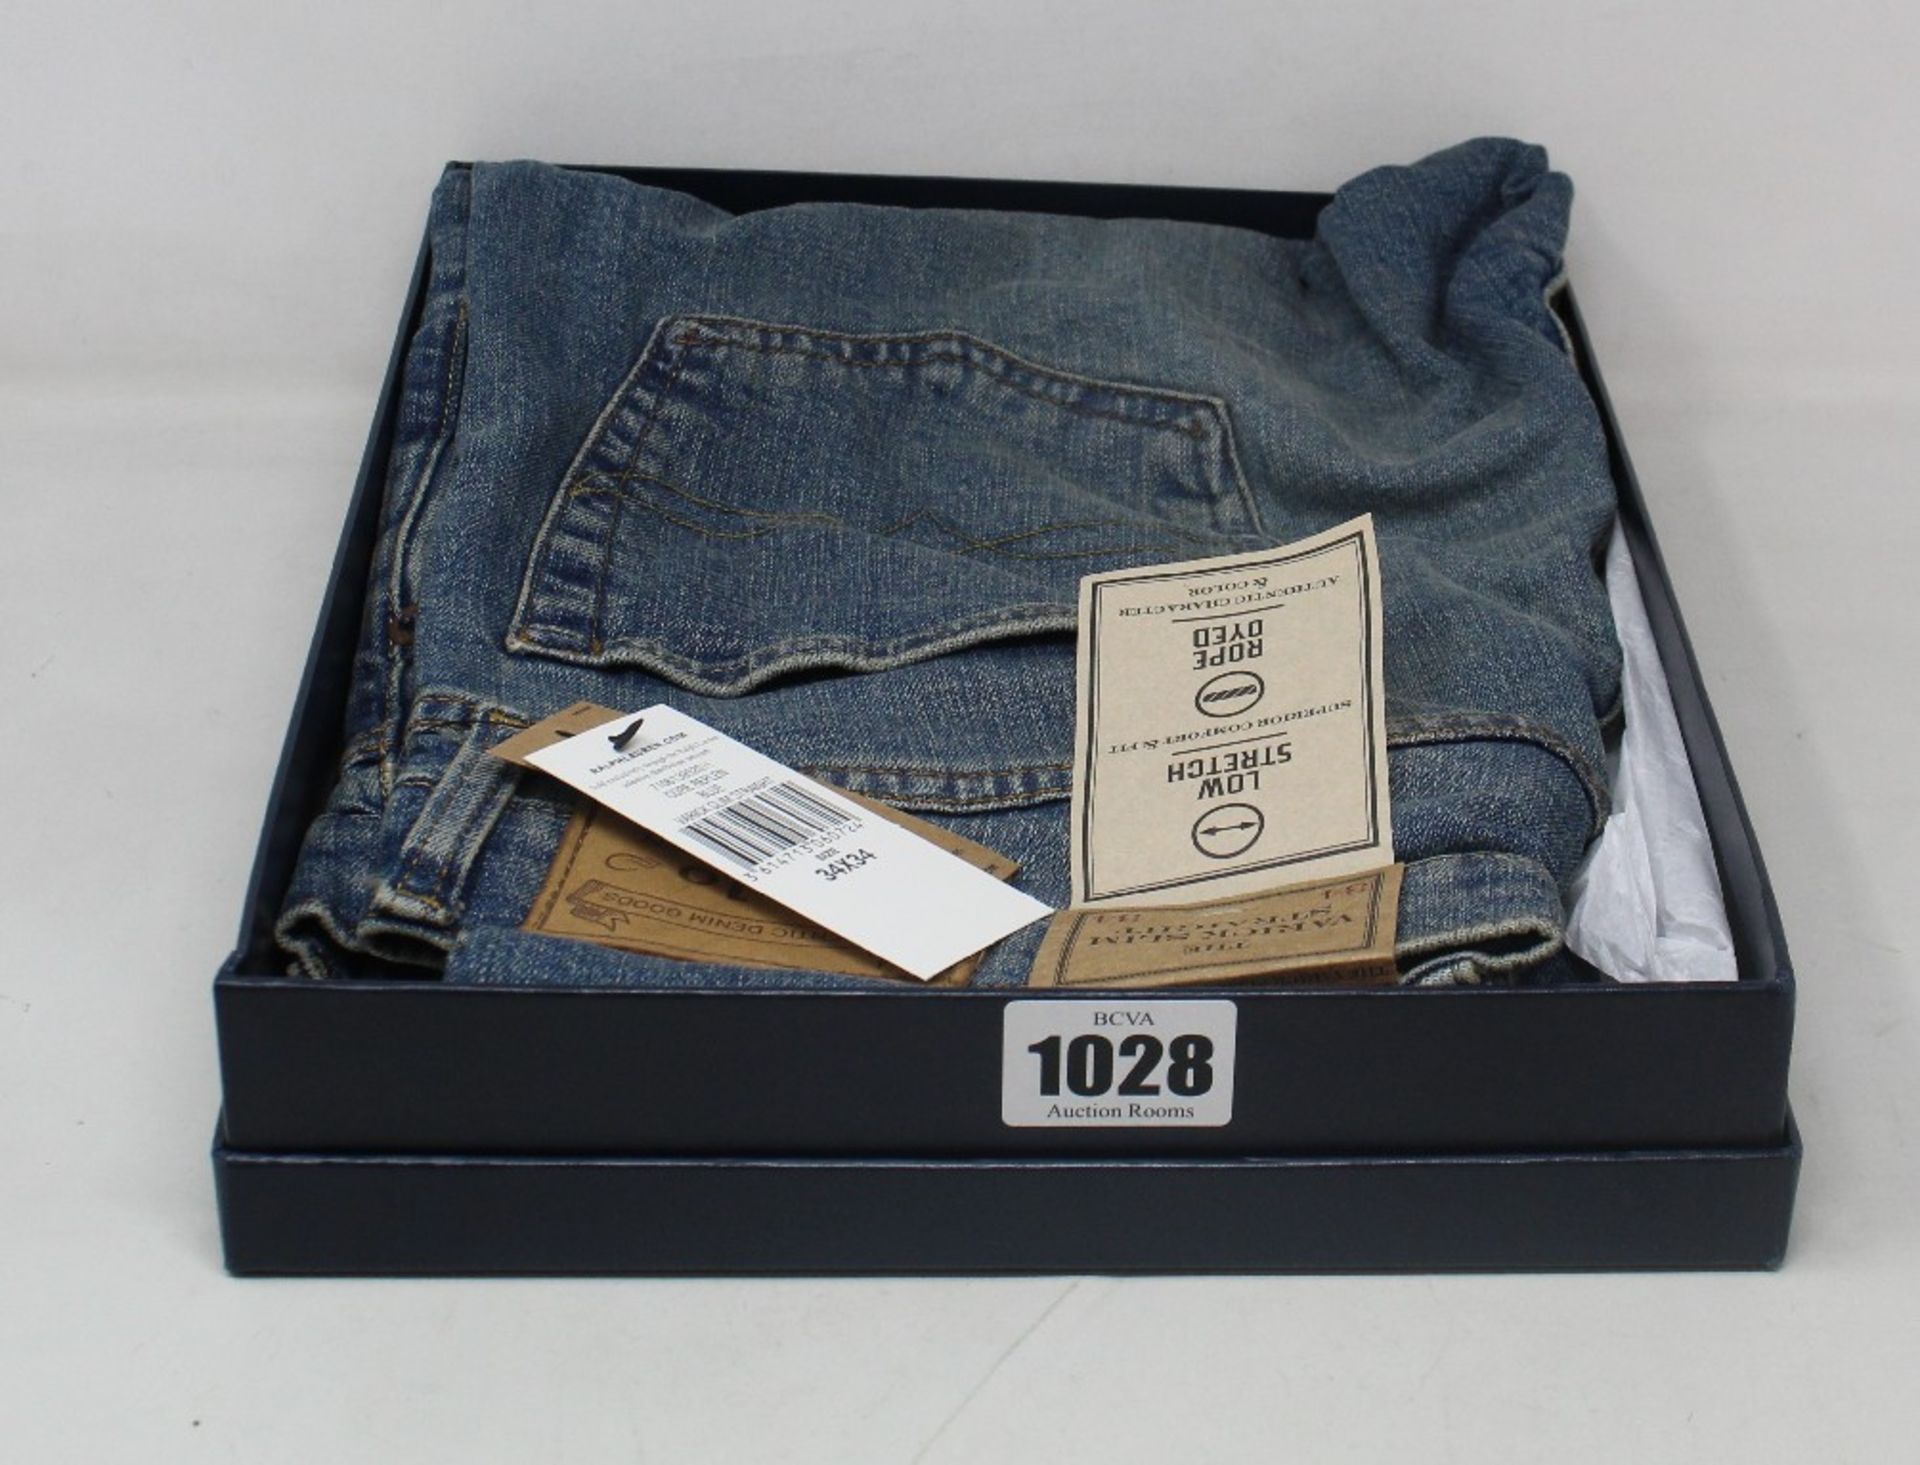 A pair of as new Ralph Lauren jeans (W34/L34).